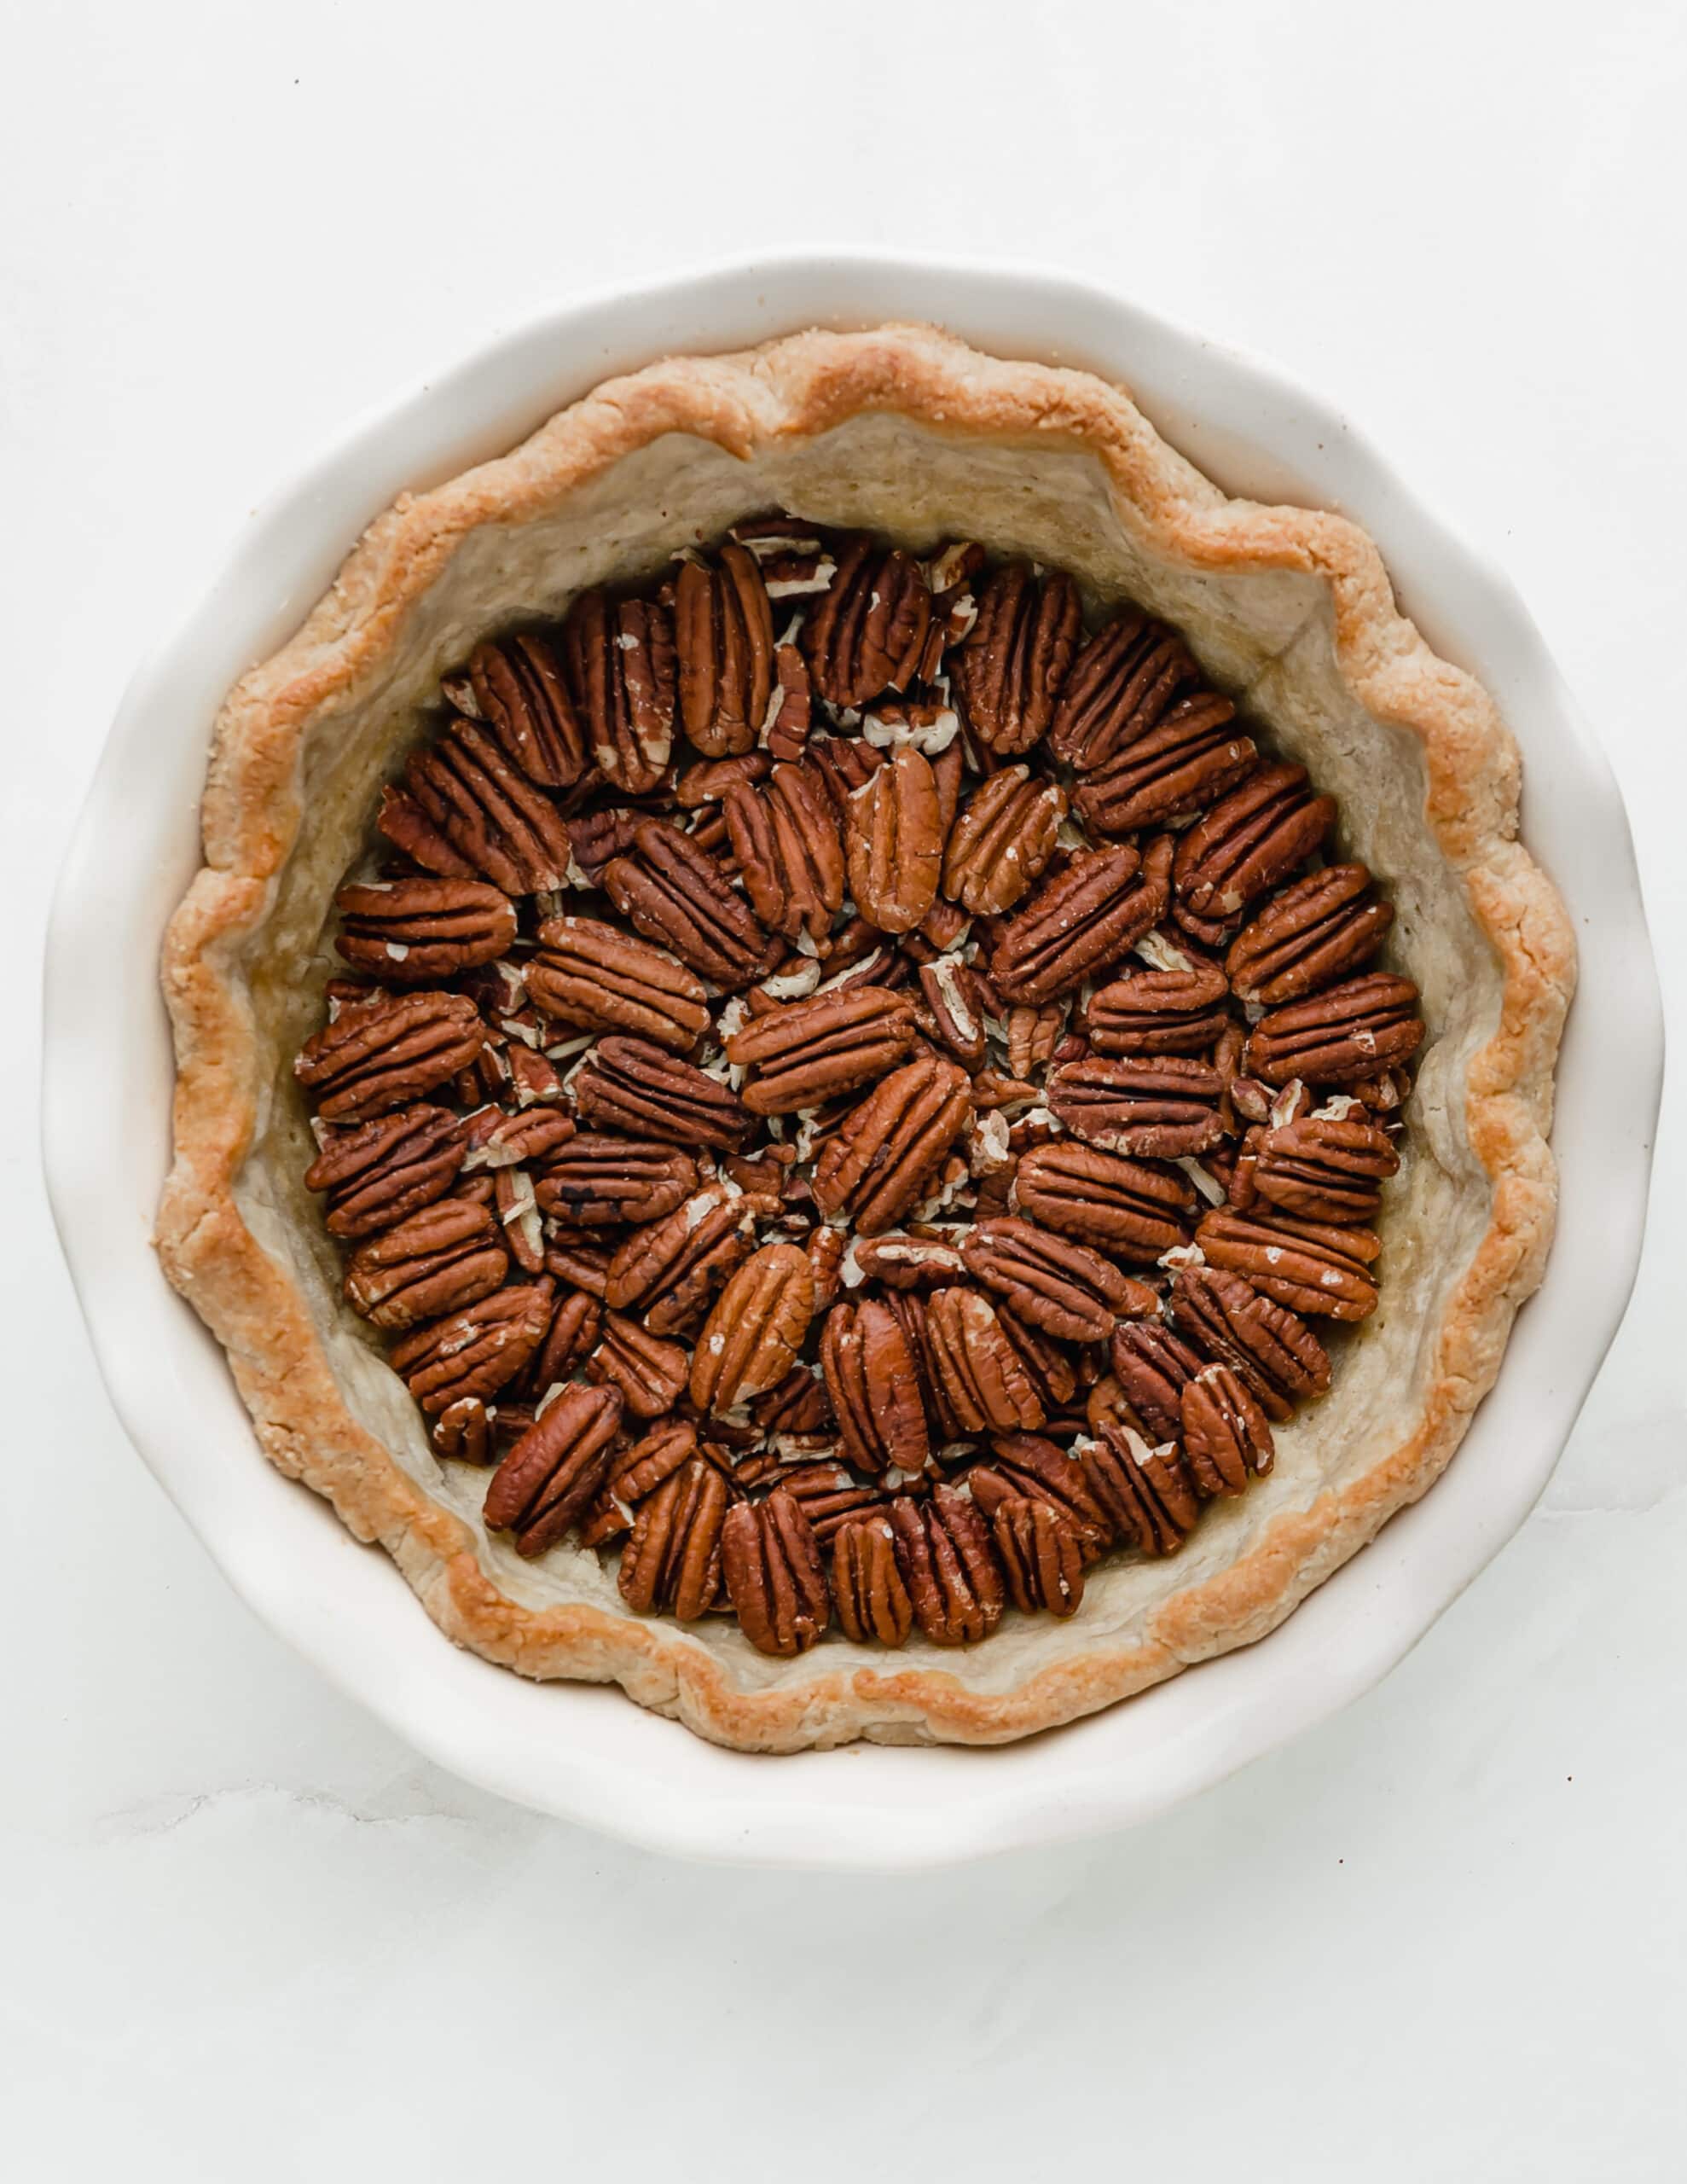 A picture of a white ceramic pie dish, with a par-baked pie crust and toasted pecans.